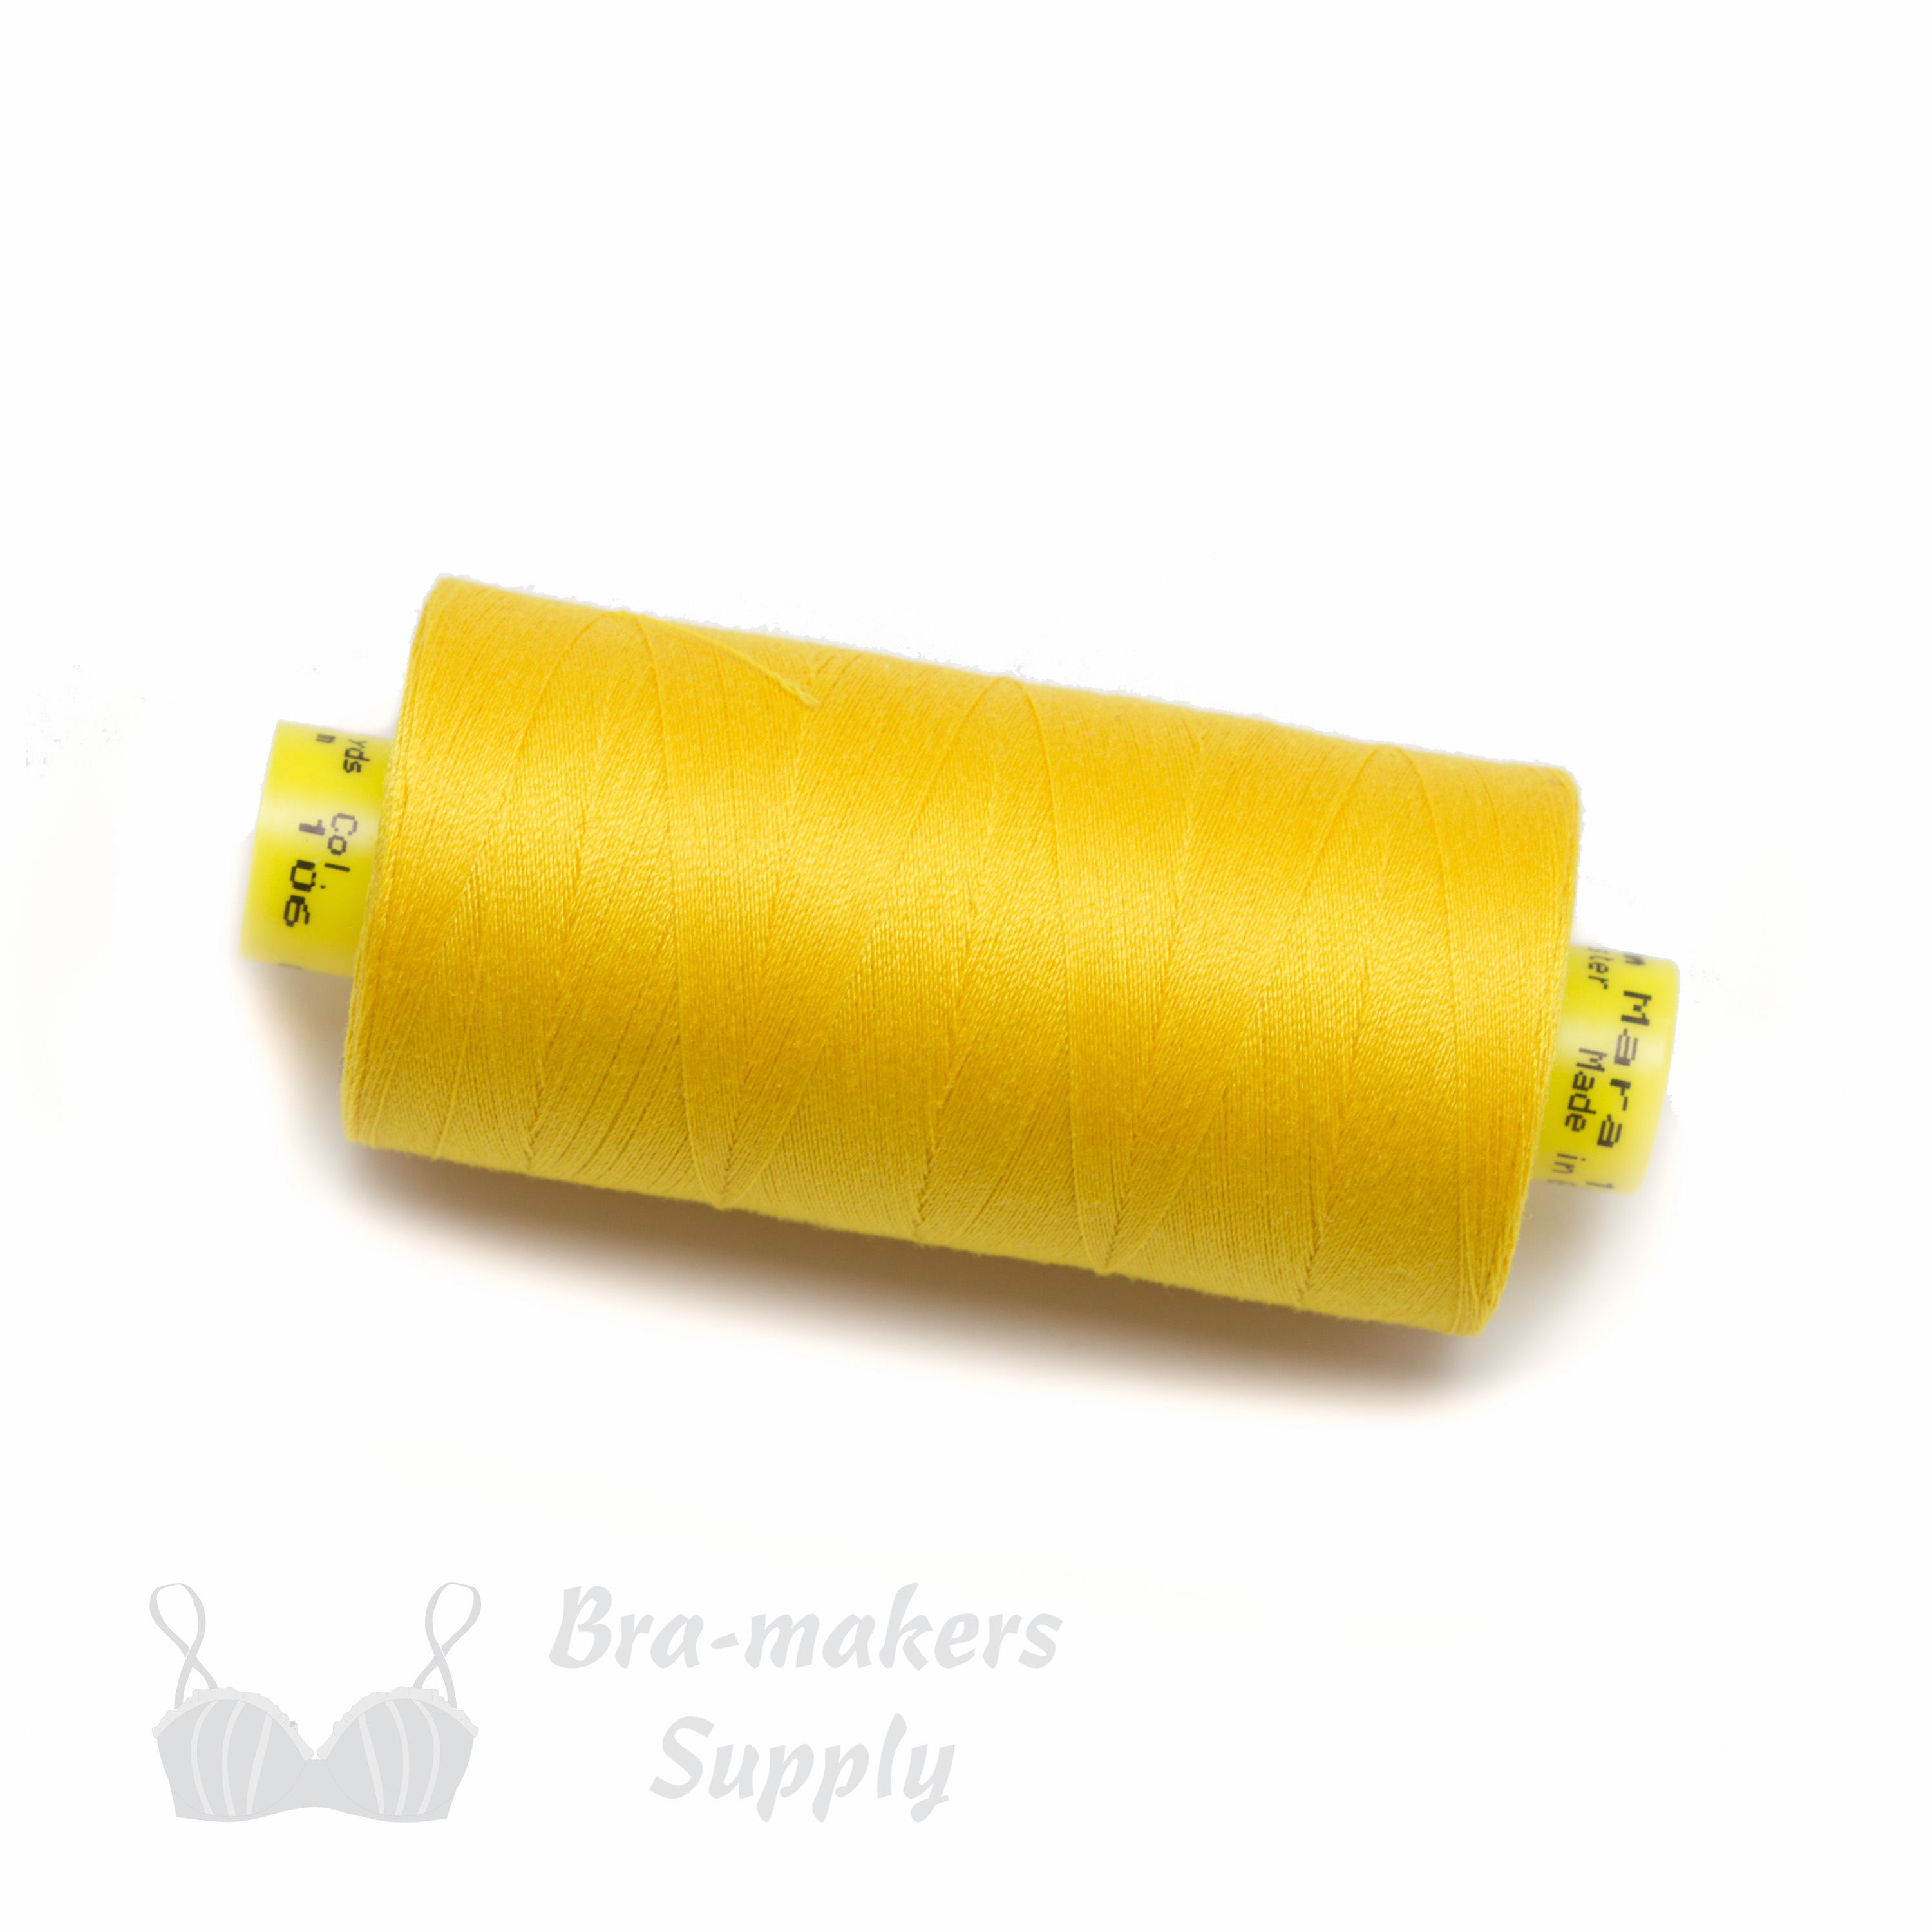 gutermann mara 120 industry quality polyester thread TG-10 ivory or Pantone 11-0507 winter white from Bra-Makers Supply 1 spool shown